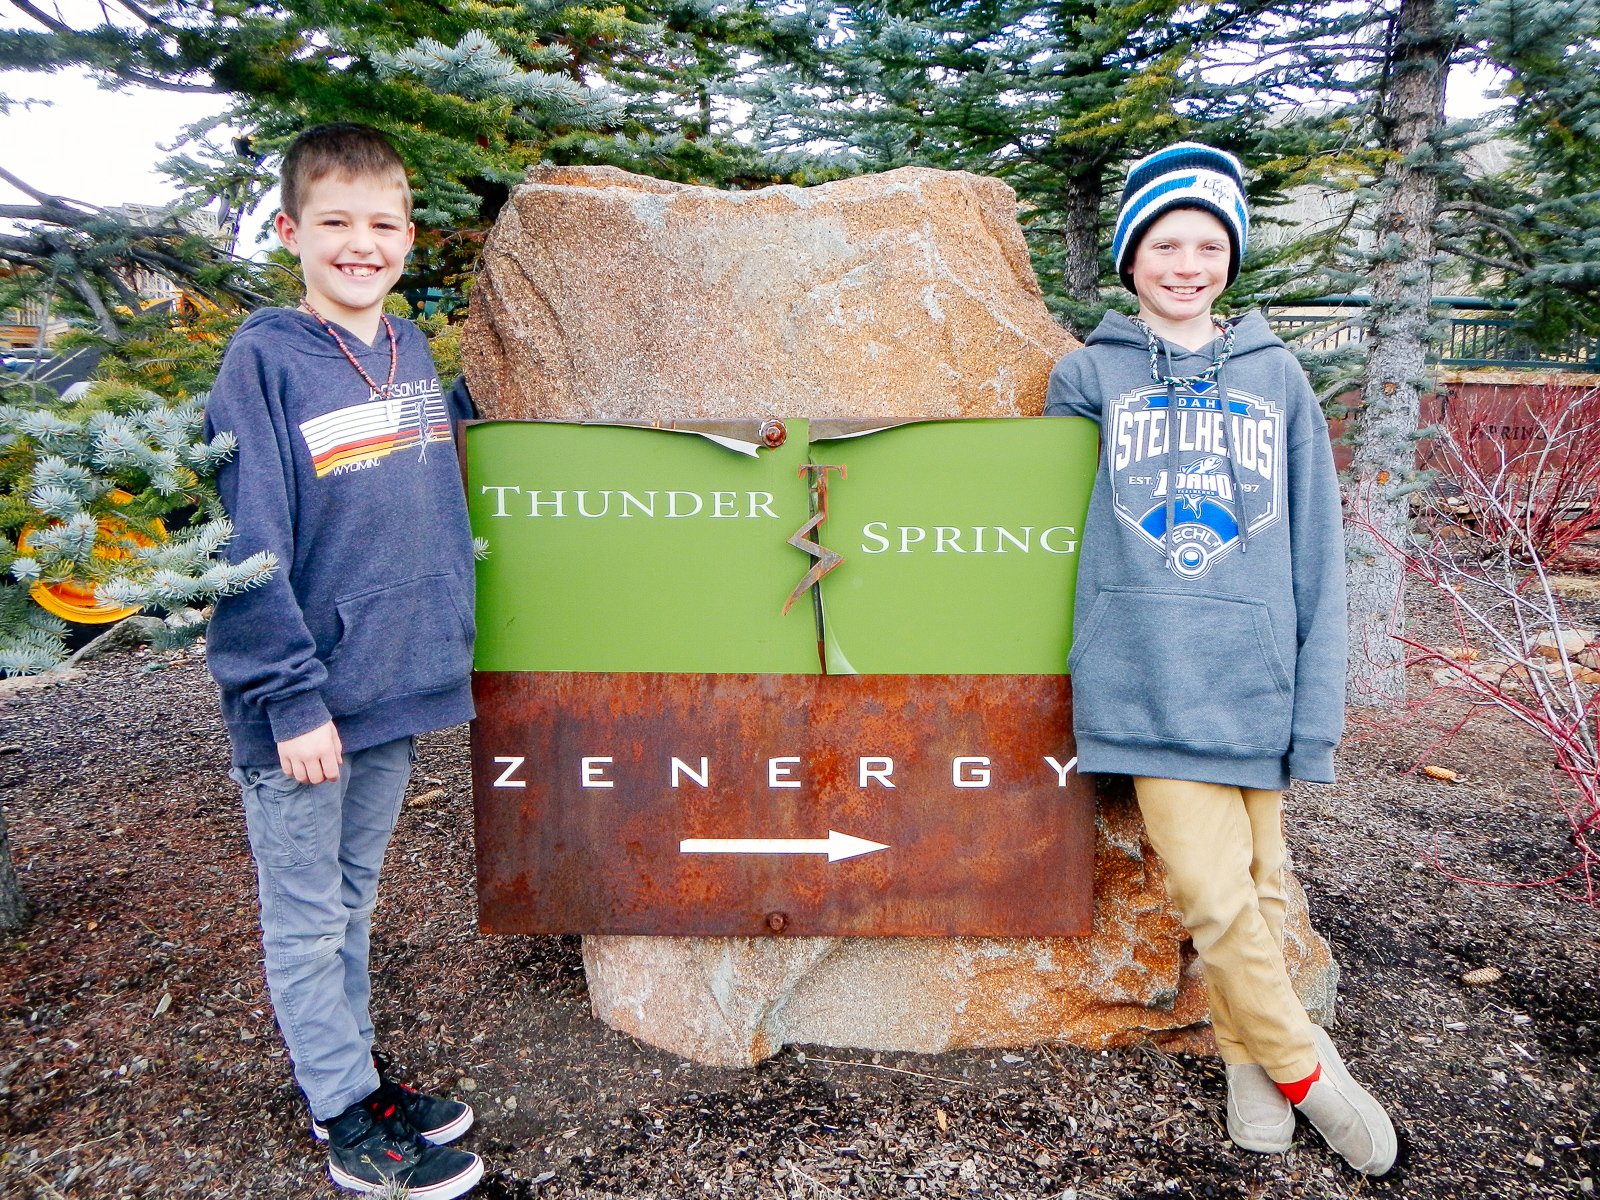 Ditch the Kids at Zenergy in Sun Valley, Idaho